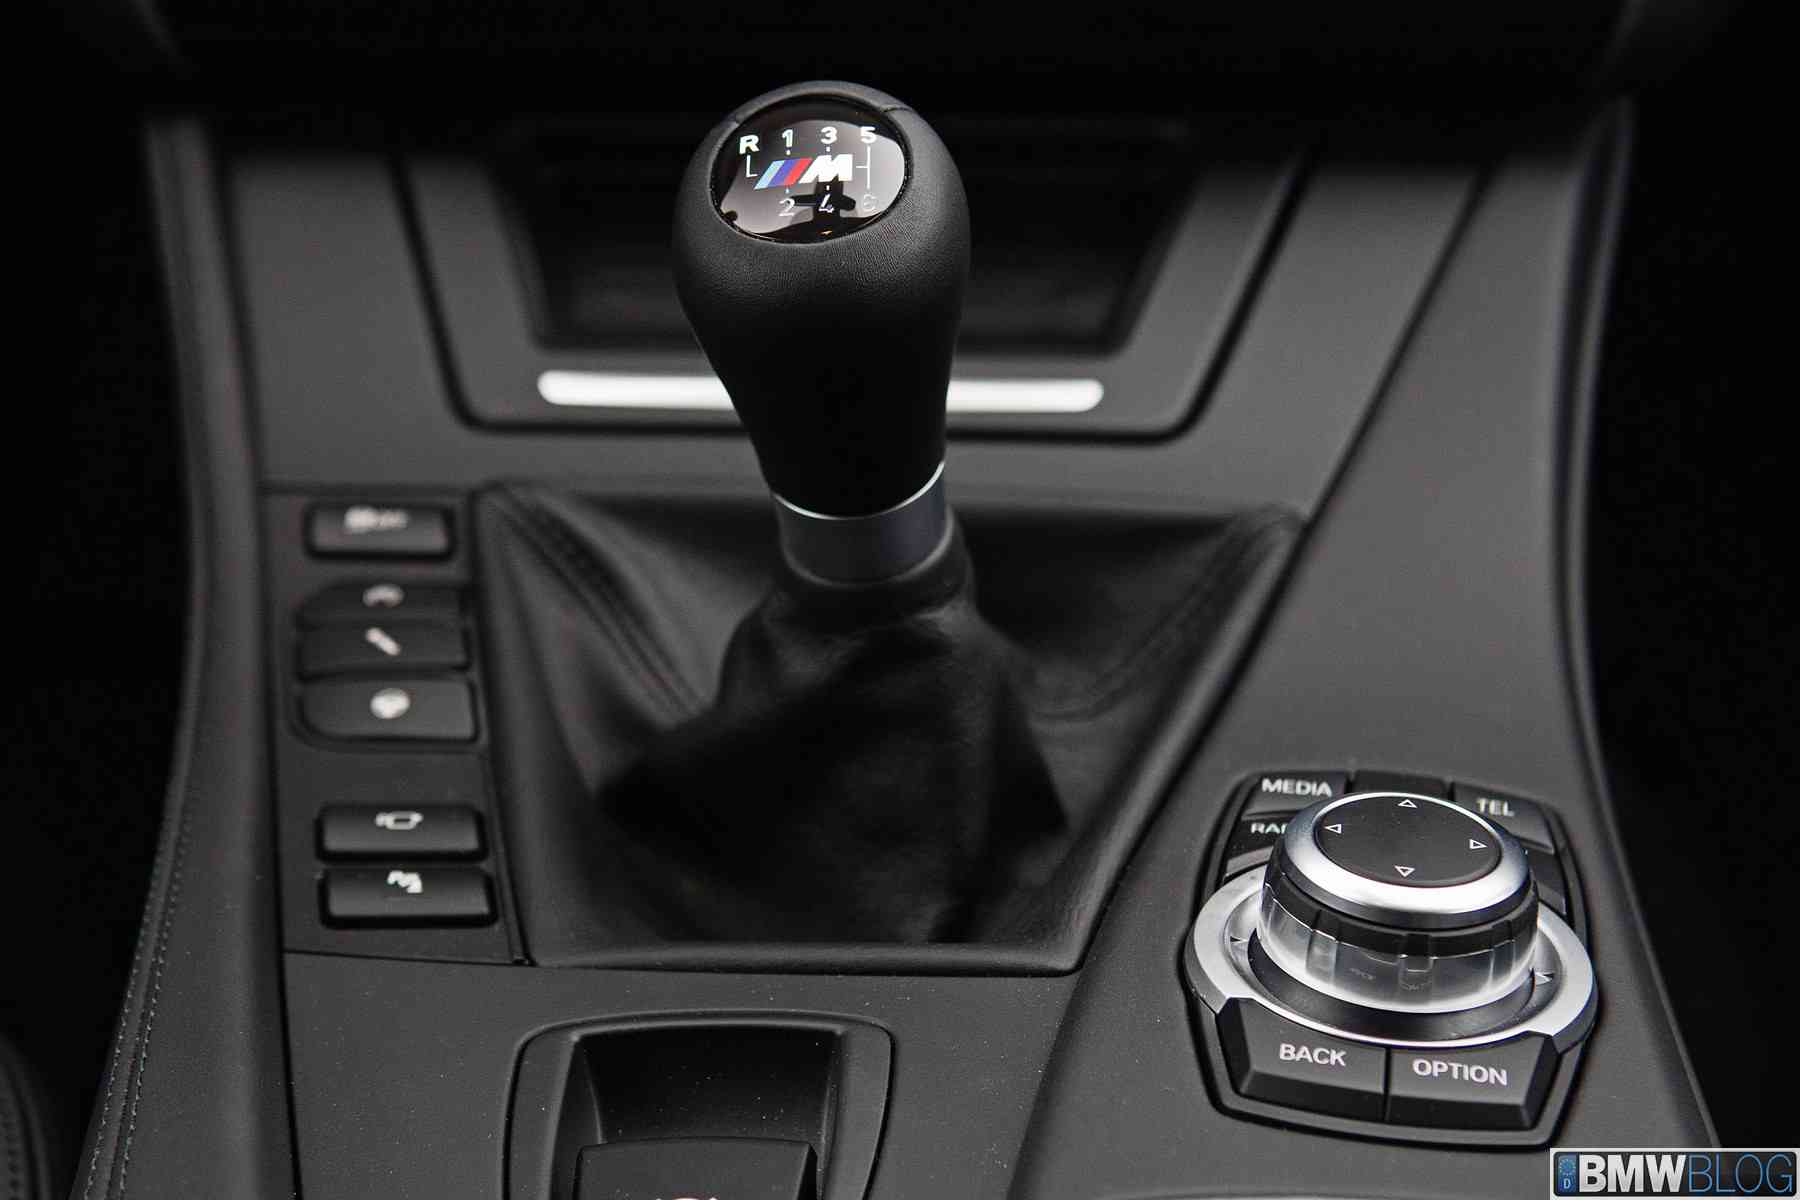 We want to save the manual transmission, but should we?